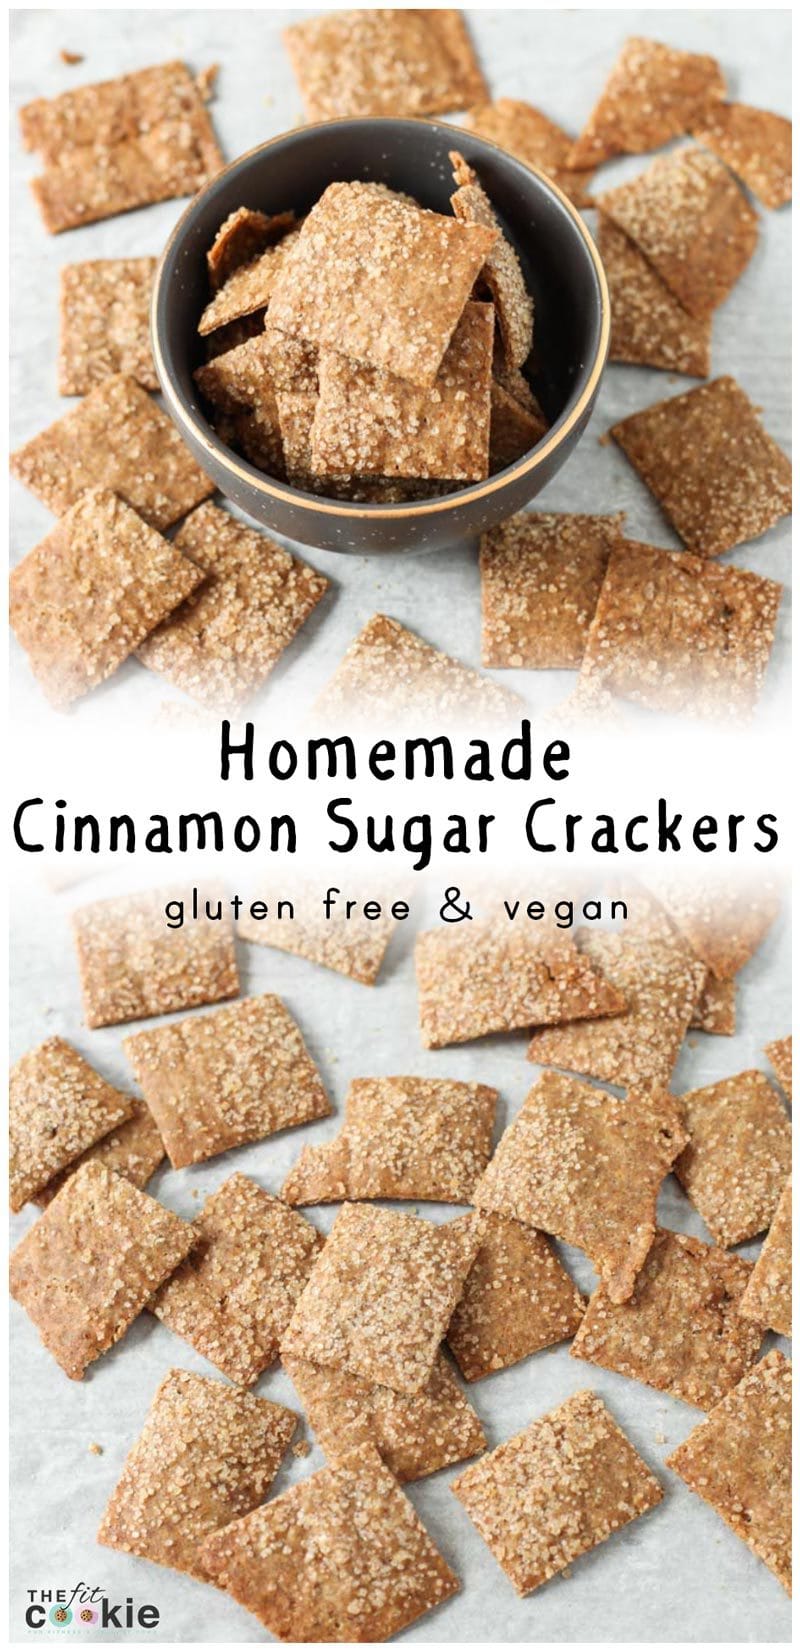 image collage of gluten free cinnamon sugar crackers in a gray bowl